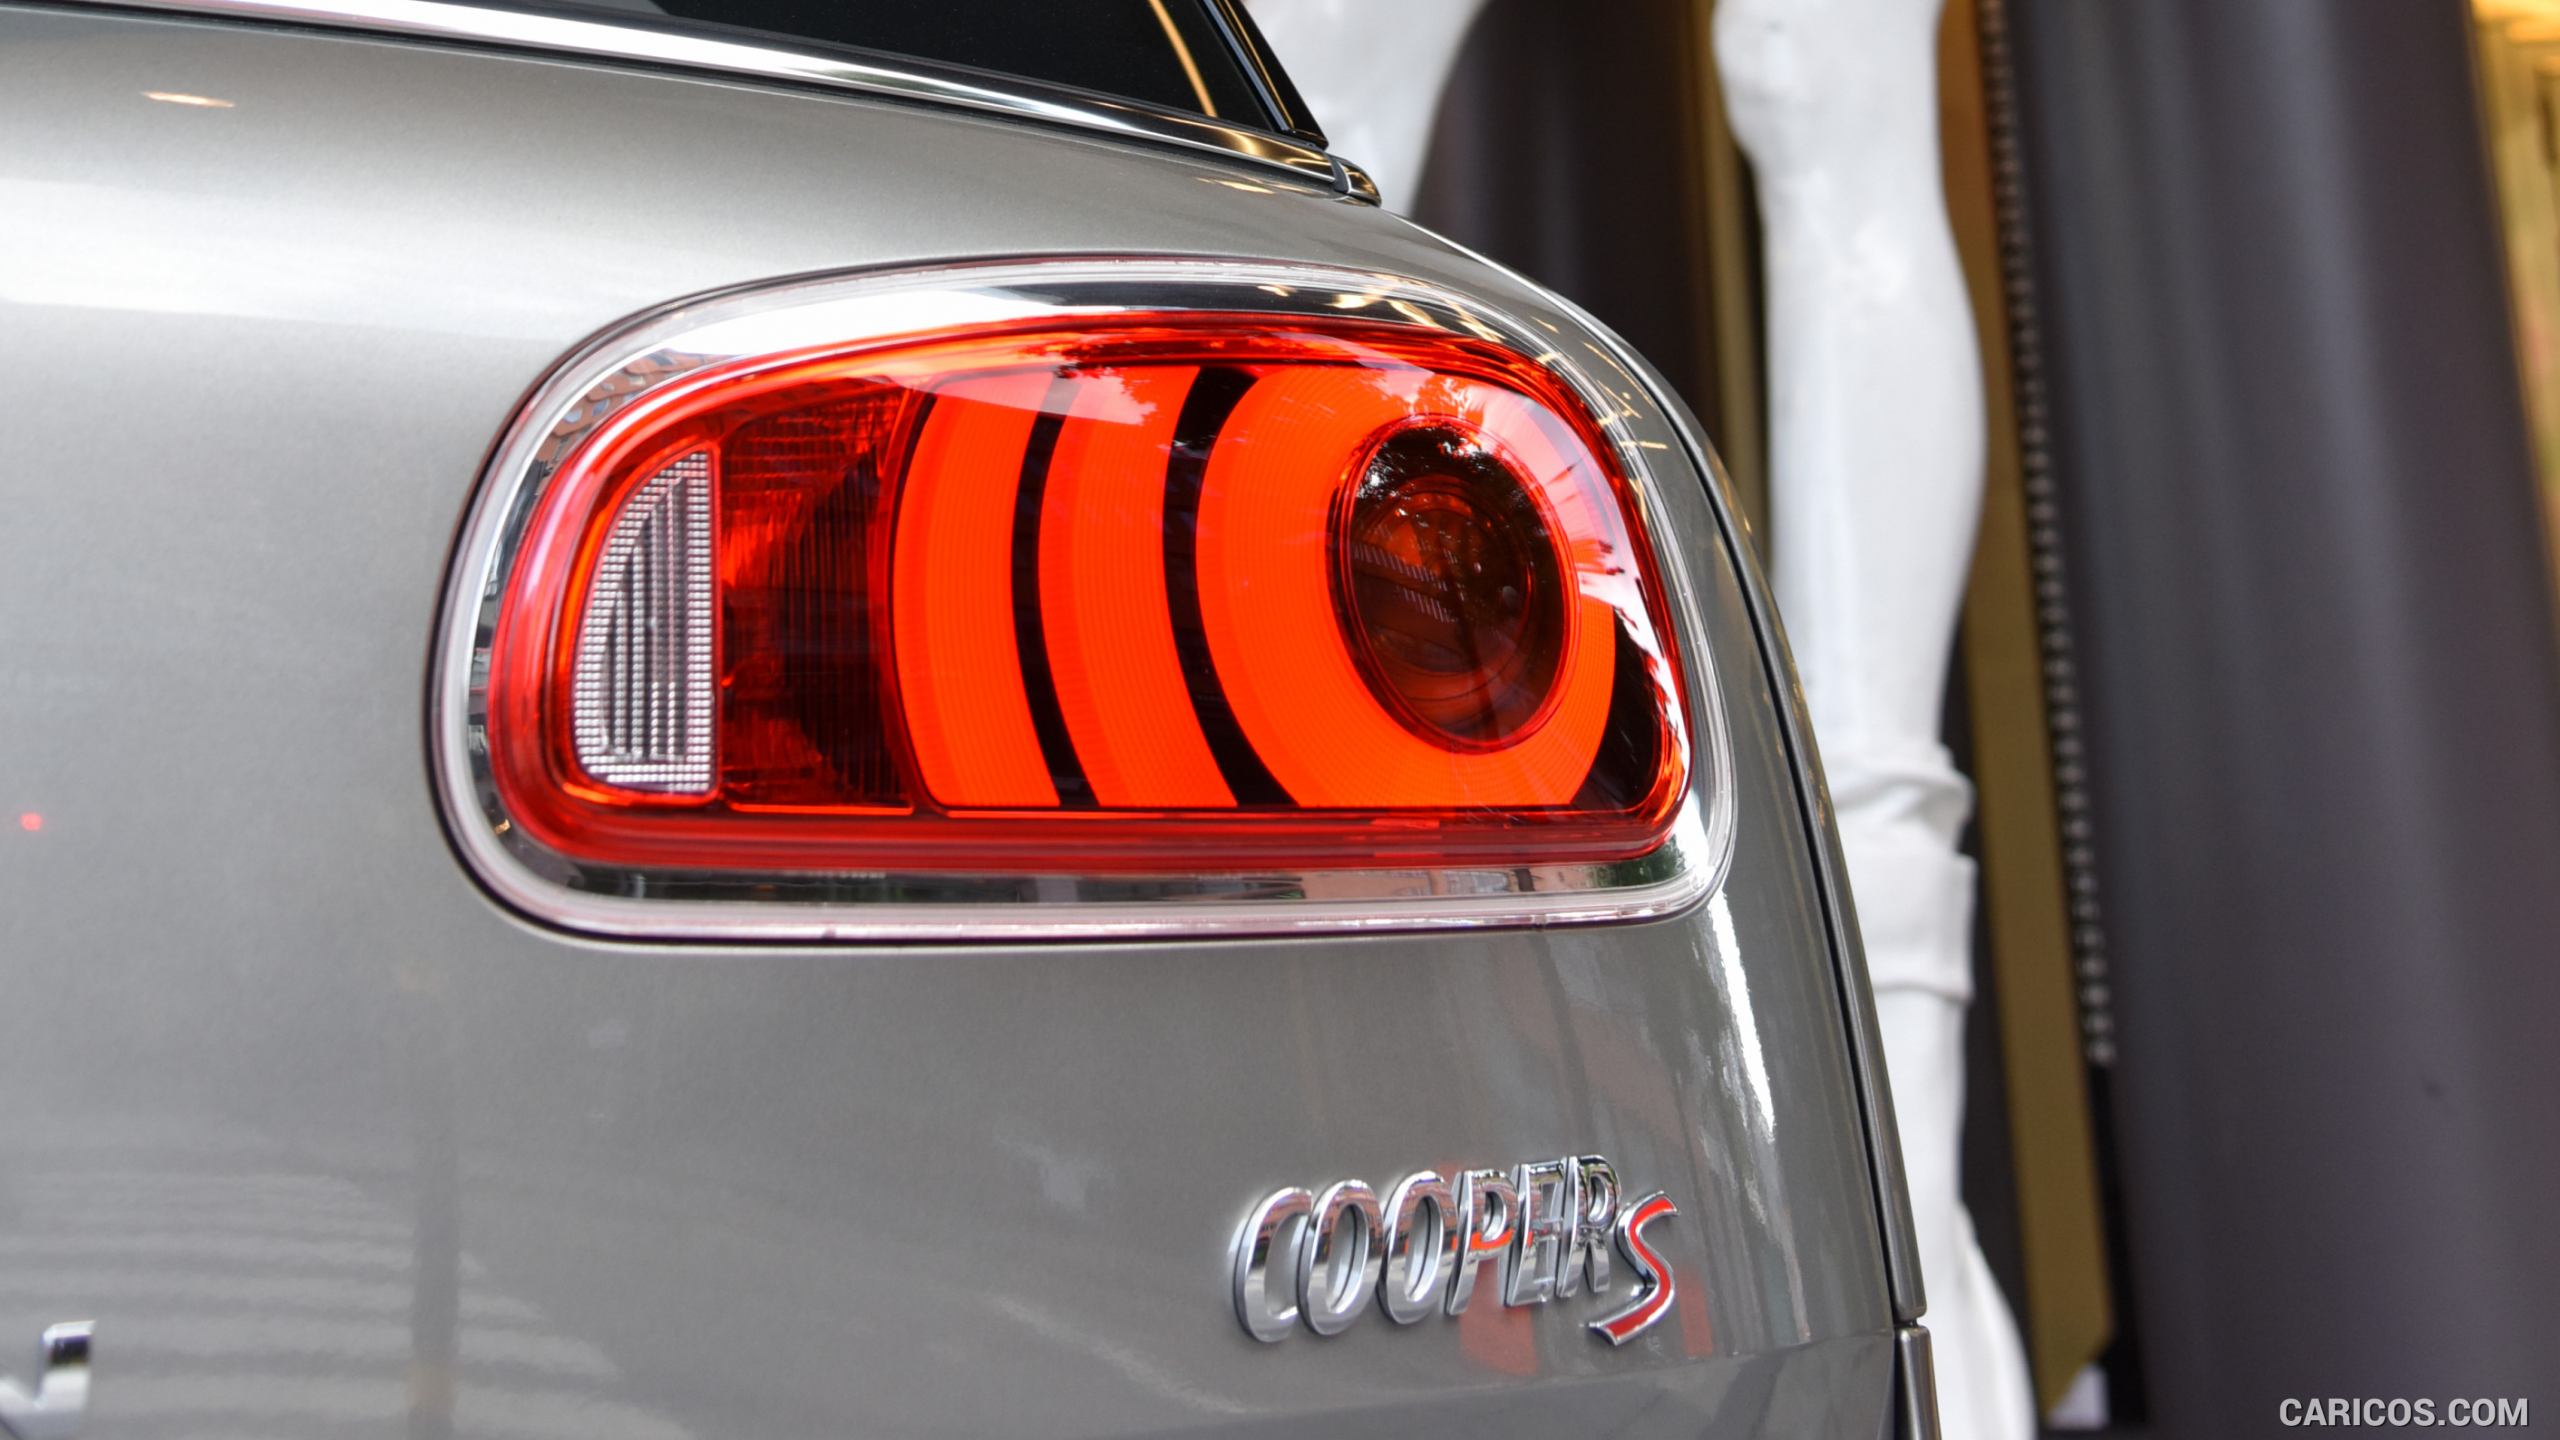 2016 MINI Cooper S Clubman in Metallic Melting Silver - Tail Light, #178 of 380